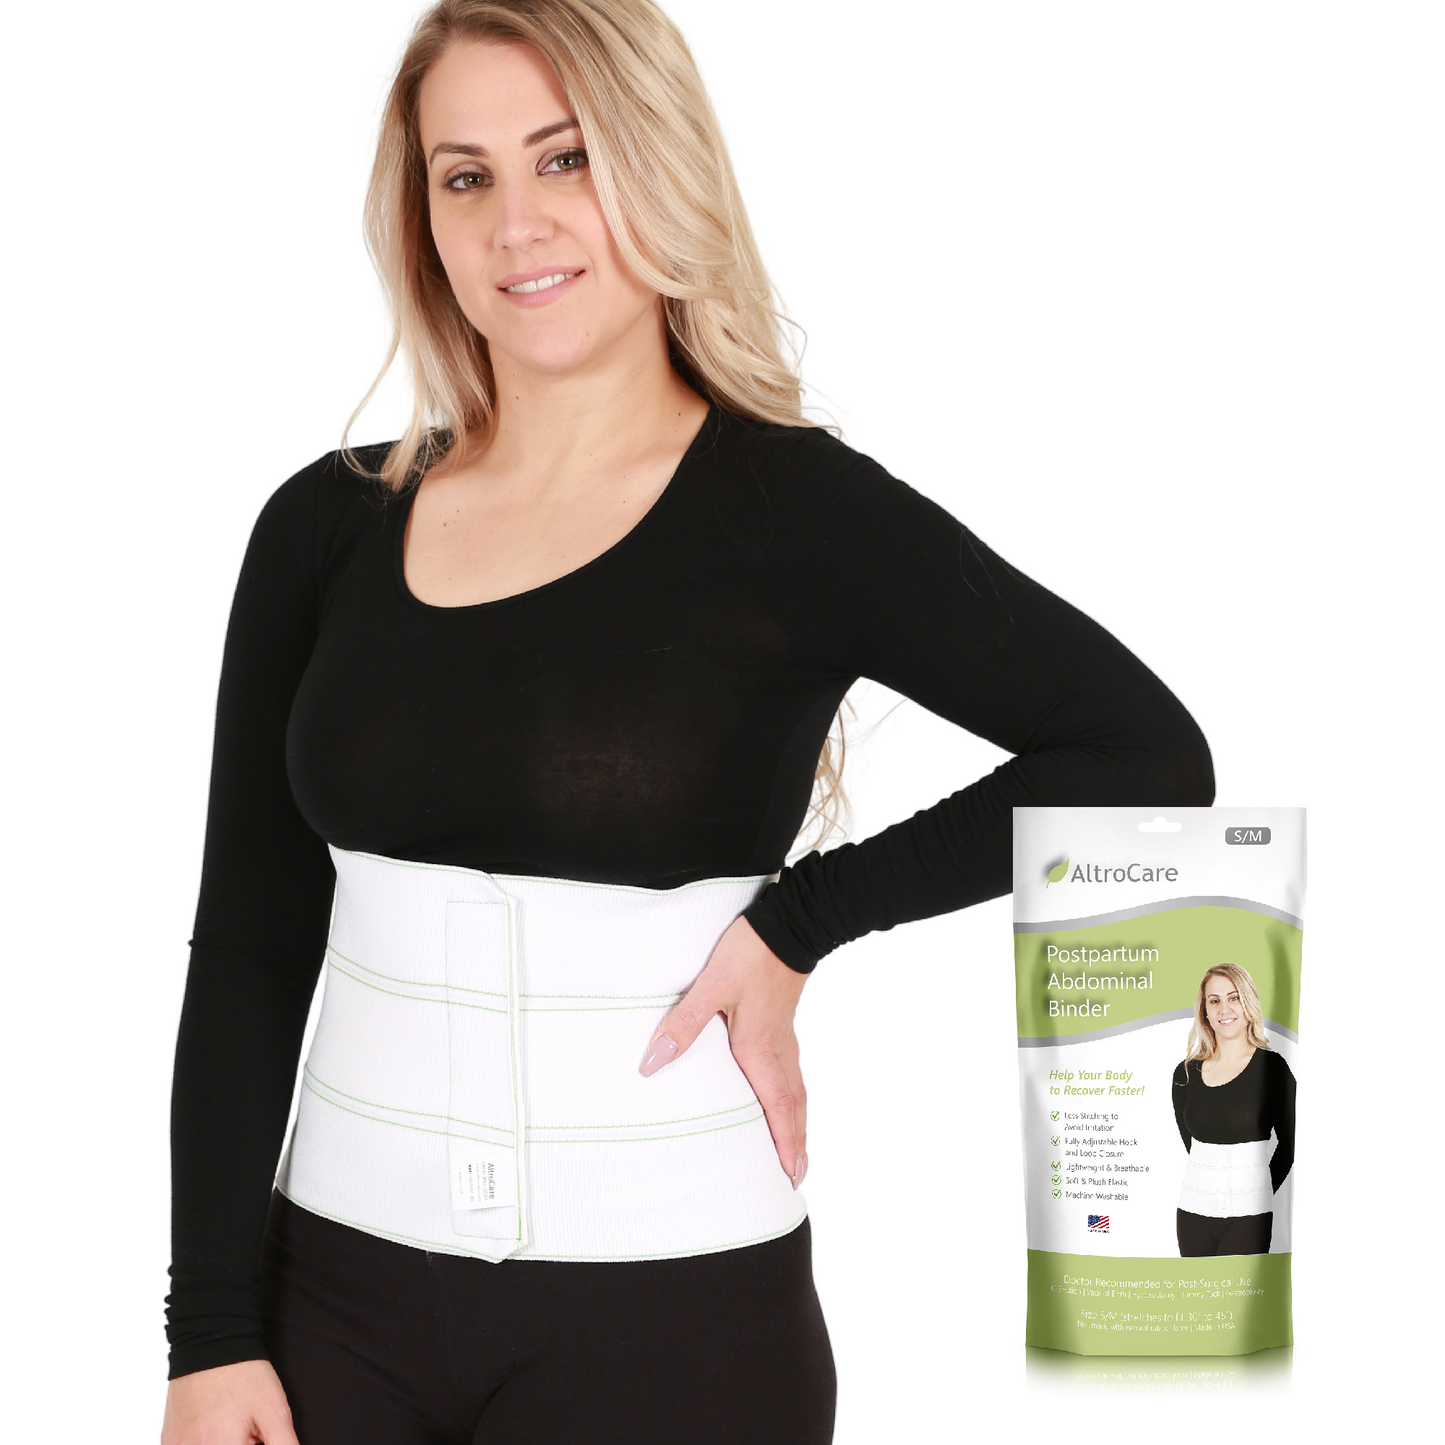 Benefits of Using an Abdominal Belly Wrap After a Hysterectomy